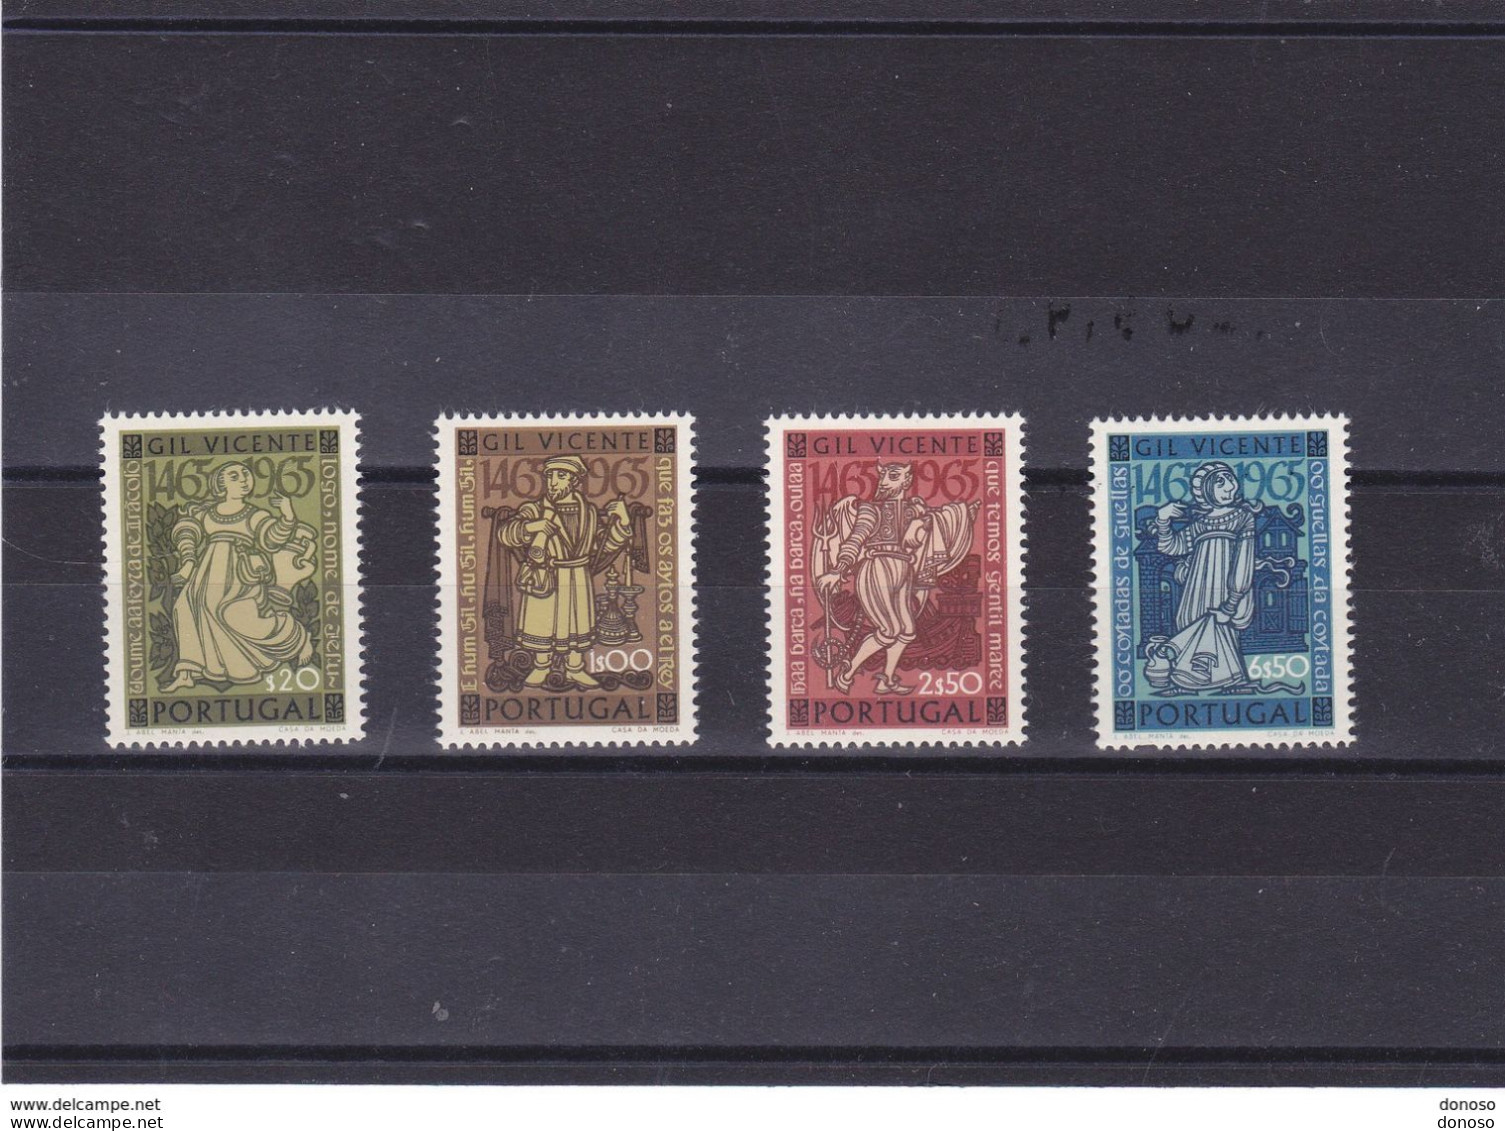 PORTUGAL 1966 GIL VICENTE, Poète Yvert 977-980, Michel 996-999 NEUF** MNH Cote 6,25 Euros - Unused Stamps